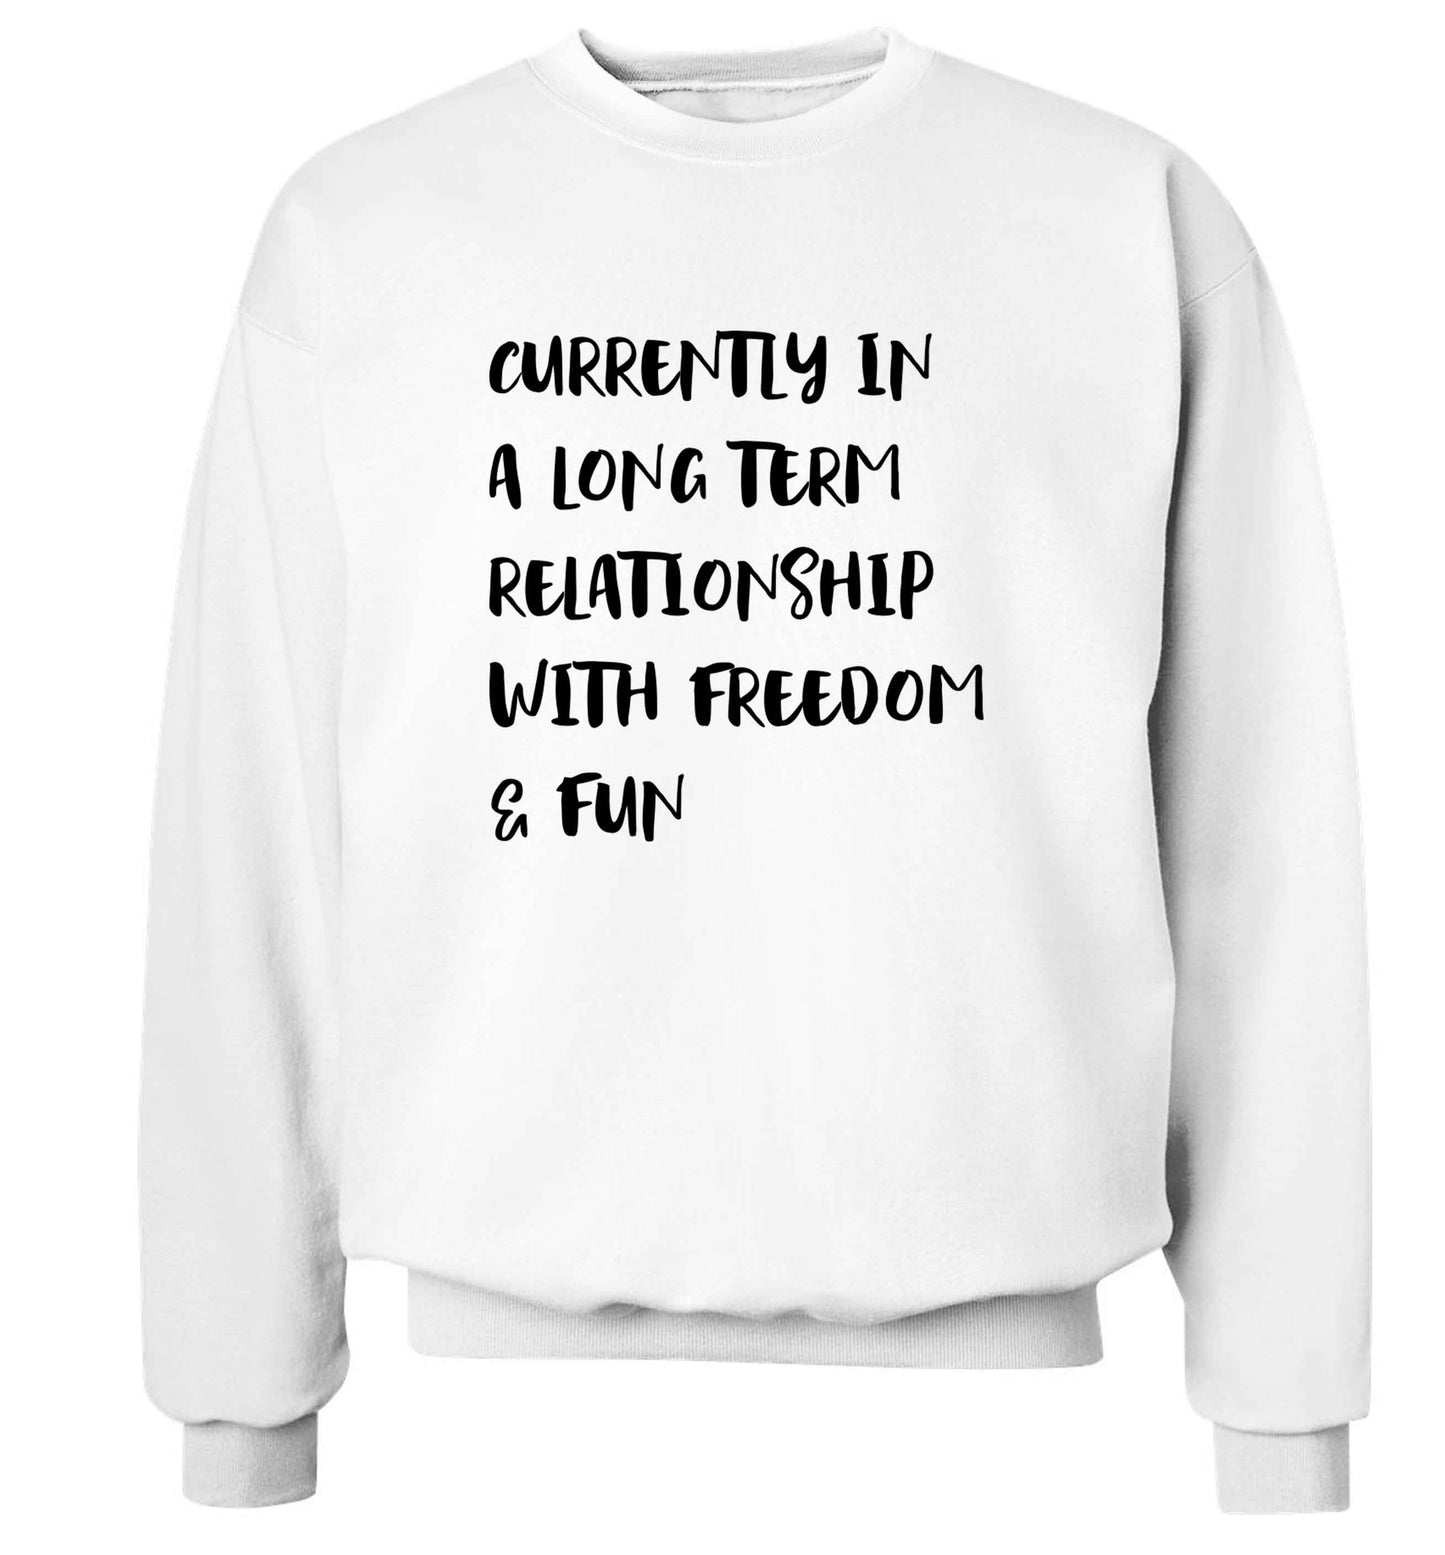 Currently in a long term relationship with freedom and fun adult's unisex white sweater 2XL